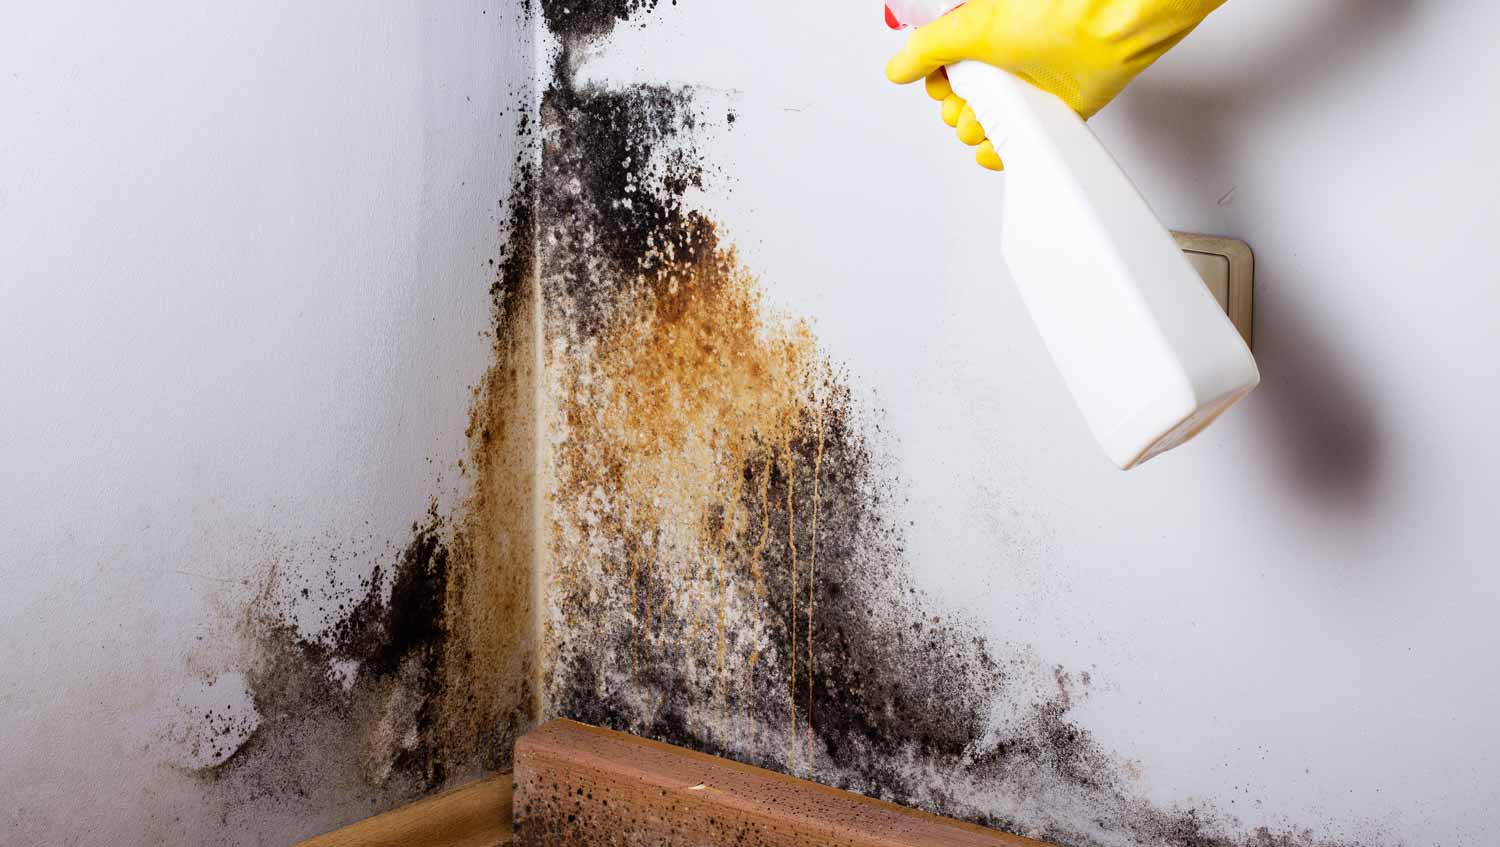 mold testing mold remediation Wake Forest NC mold removal mold damage repair